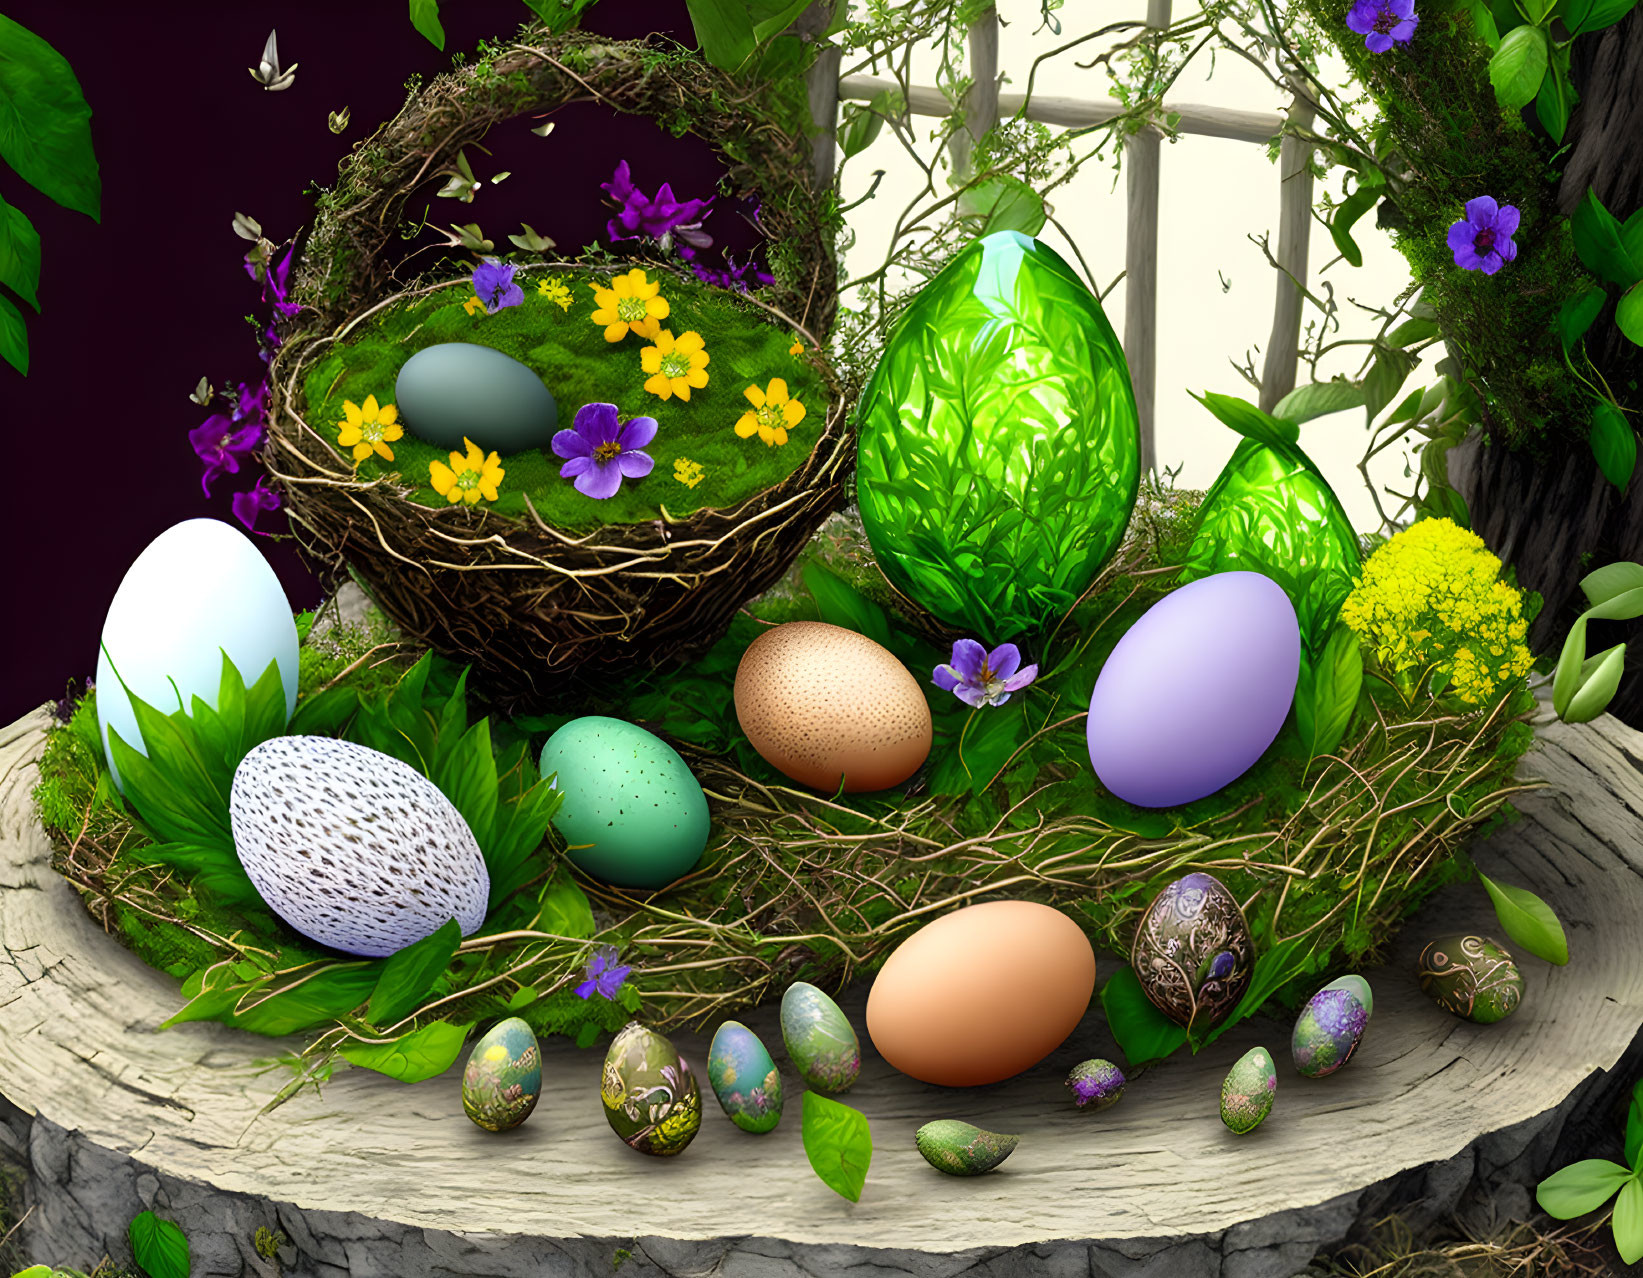 Ostara Altar: flowers, nests and eggs, sprouts